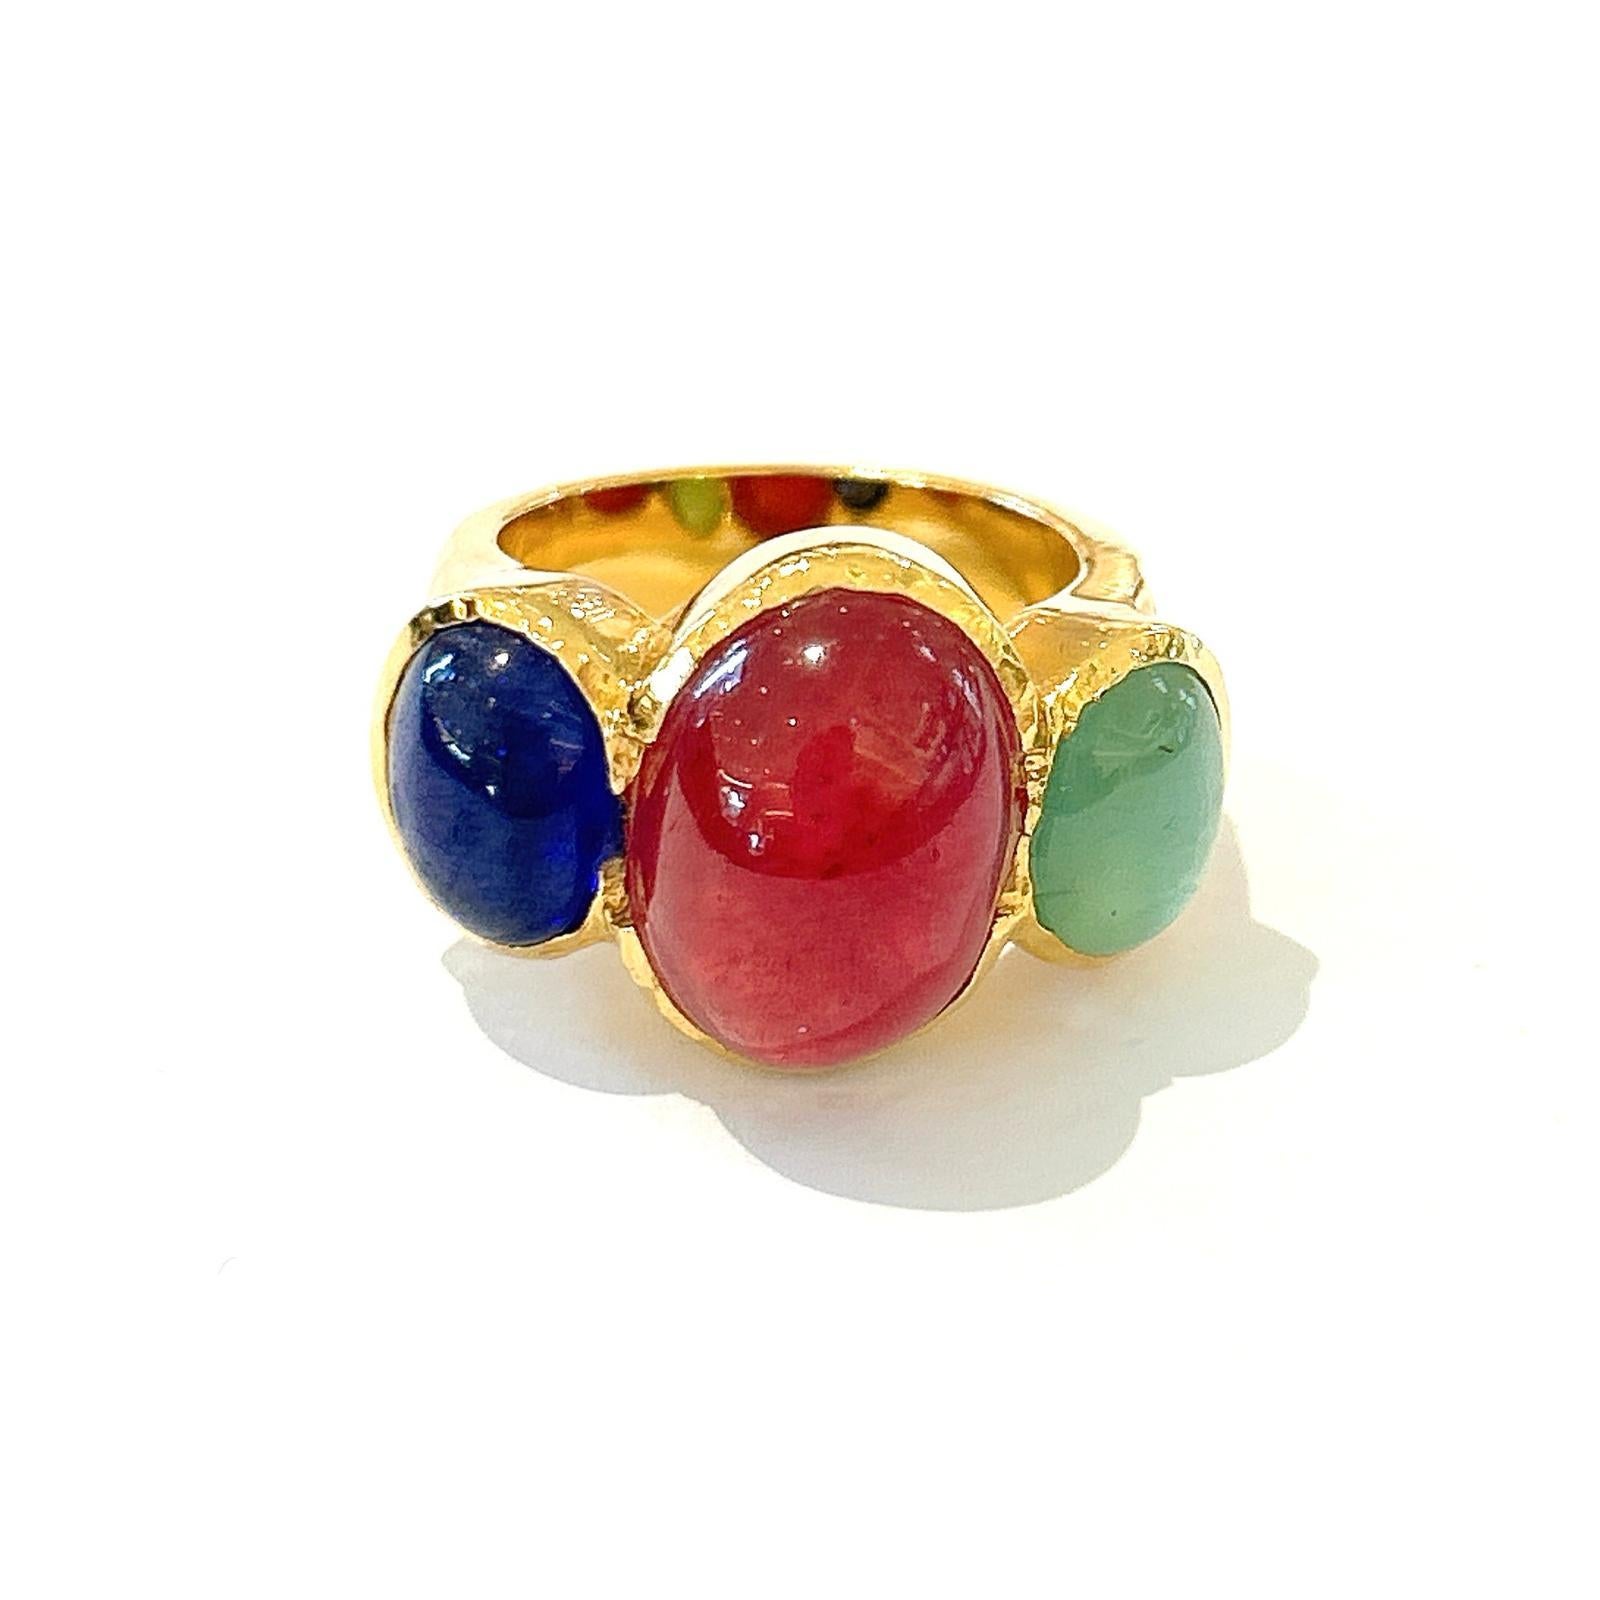 Bochic “Orient” Ruby, Emerald & Sapphire Vintage 3 Gem Ring Set 18K & Silver 

Red natural Ruby, Oval cabochon shape - 13 carats 
Blue Natural Sapphire, Oval shape - 4 carats 
Green Natural Emerald, Oval shape - 2 carats 

This Ring is from the